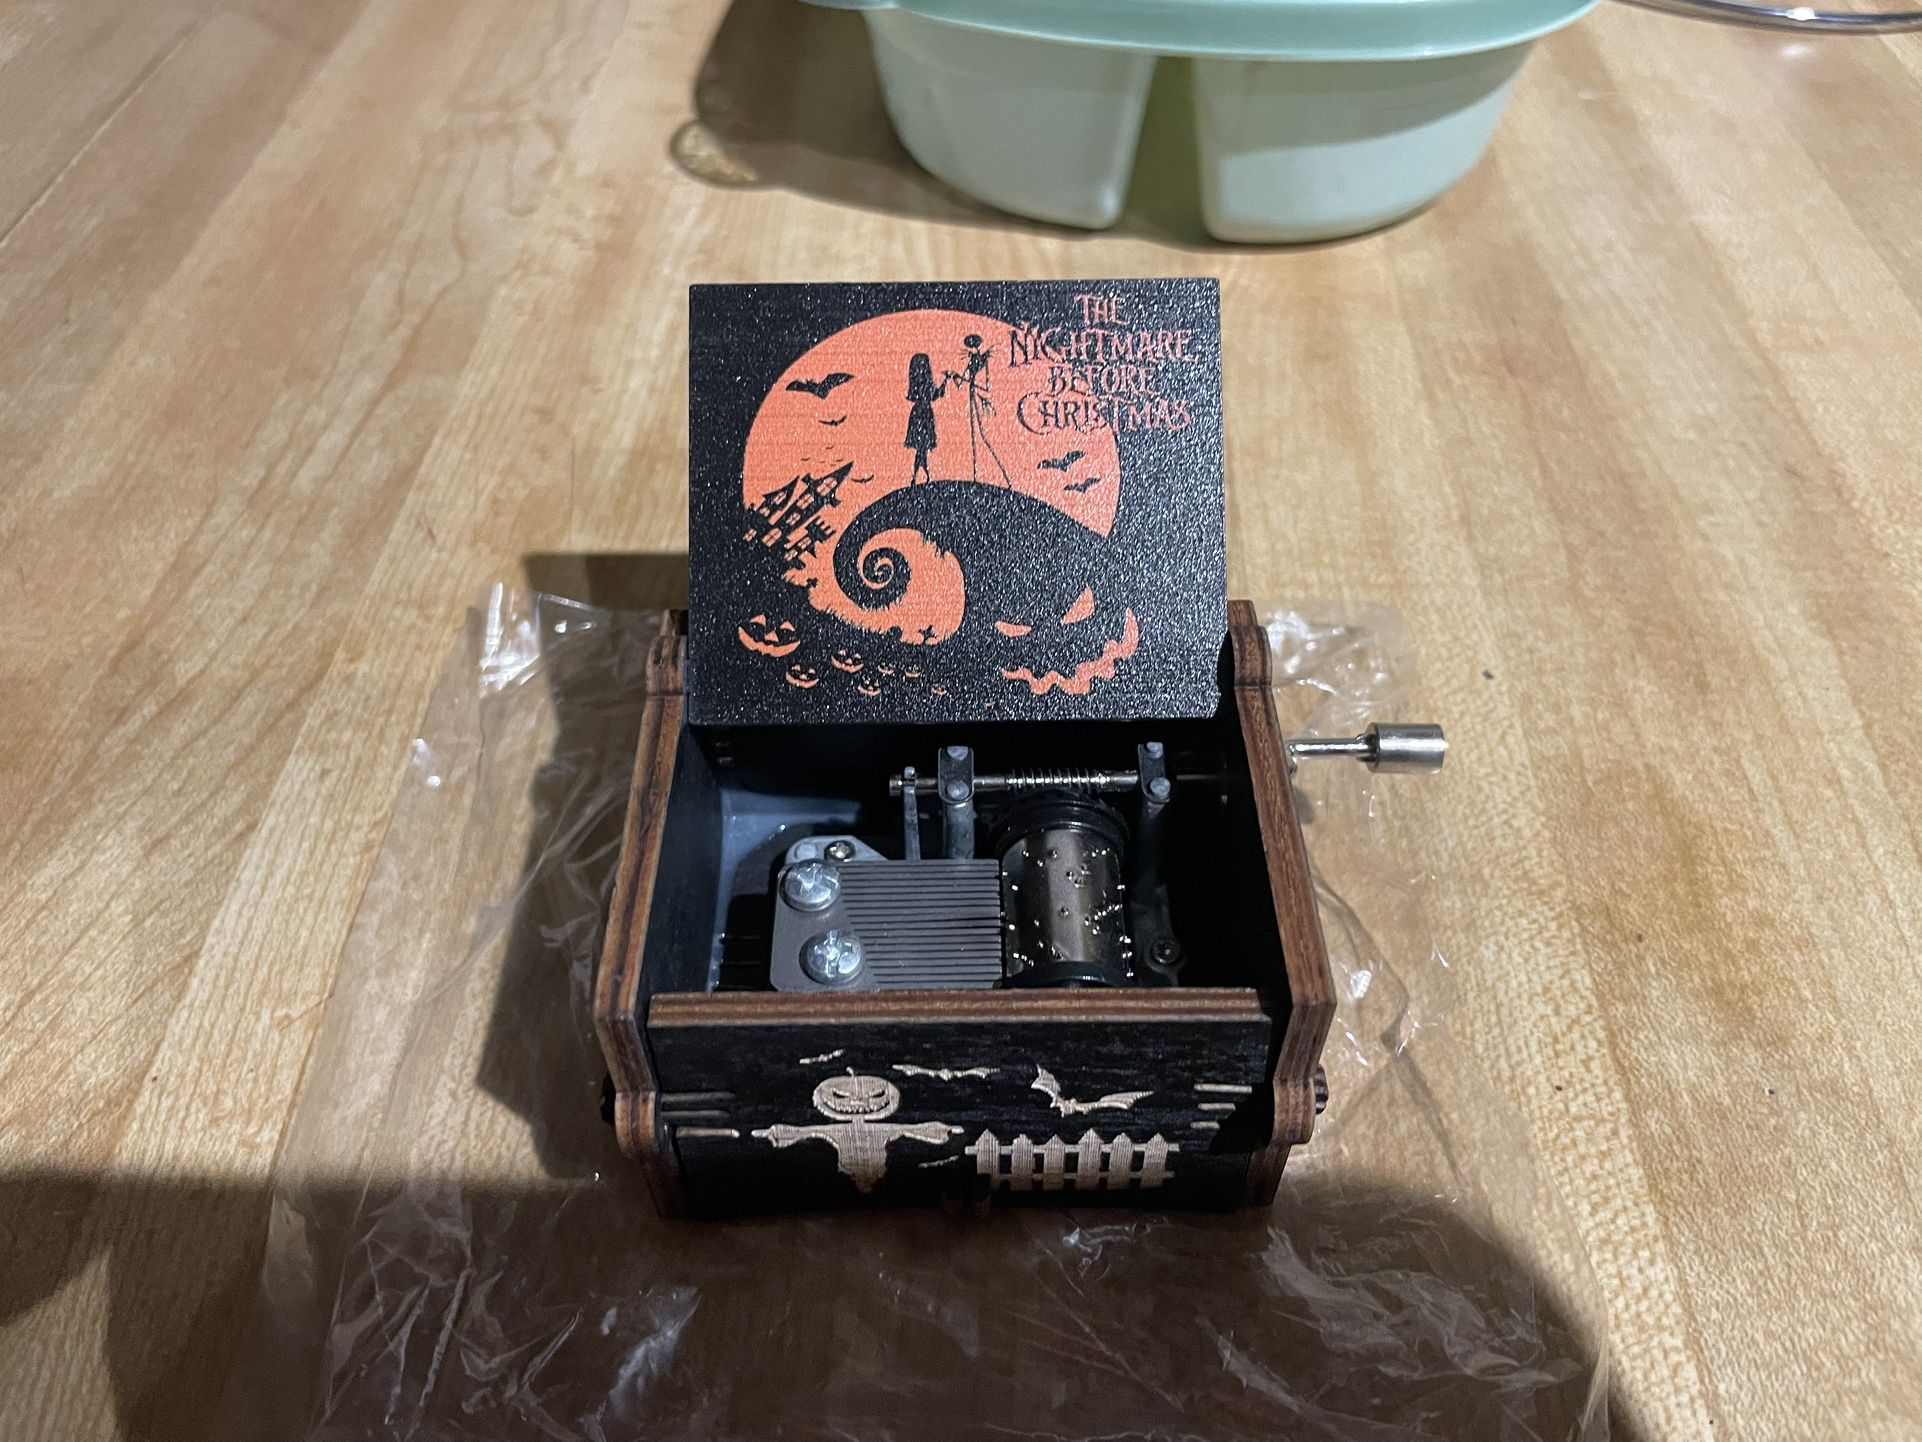 Small nightmare before Christmas music box $30 in n Lakeland or shipping available 